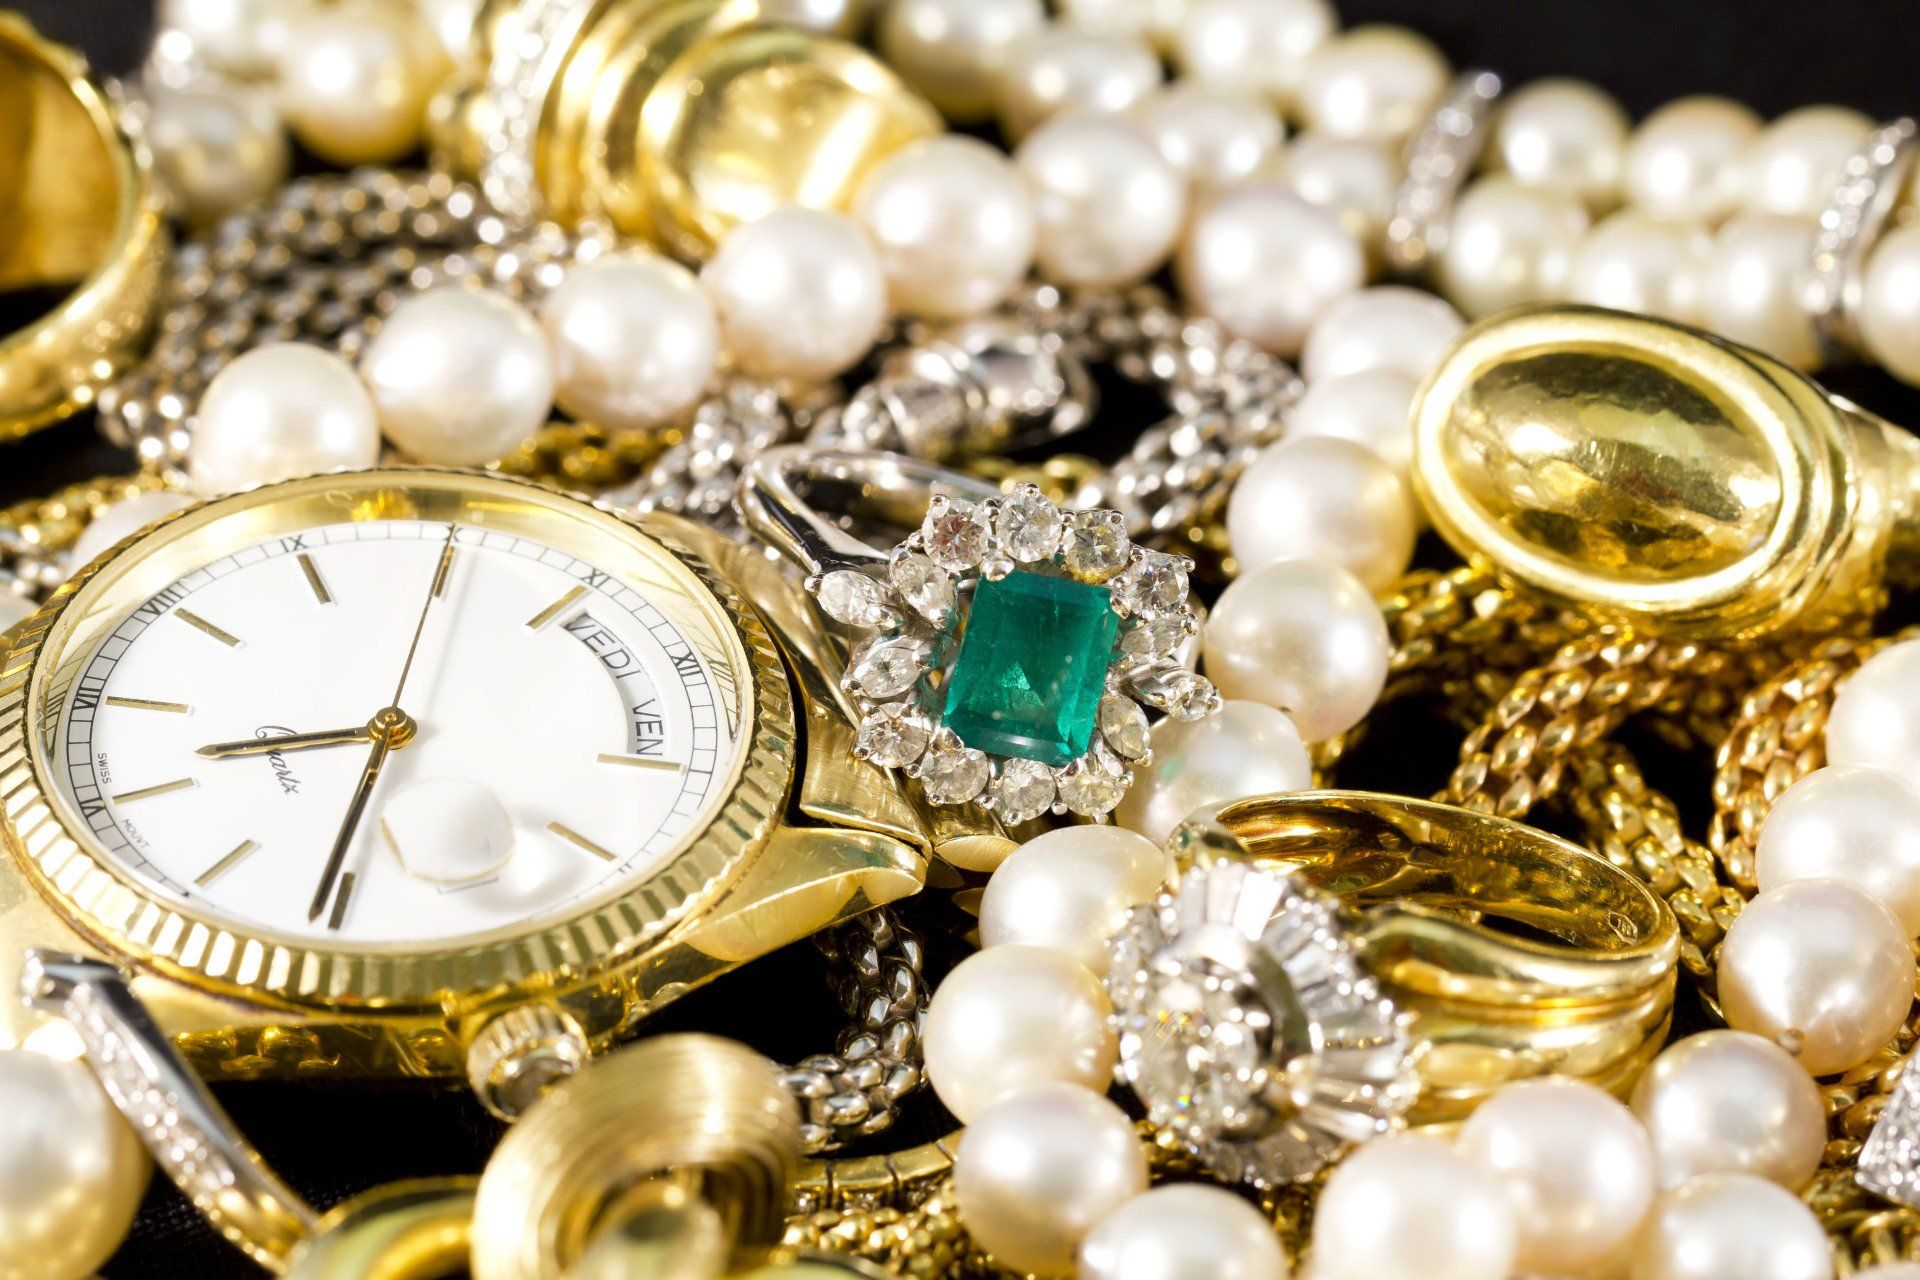 Fastfix Jewelry And Watch Repairs